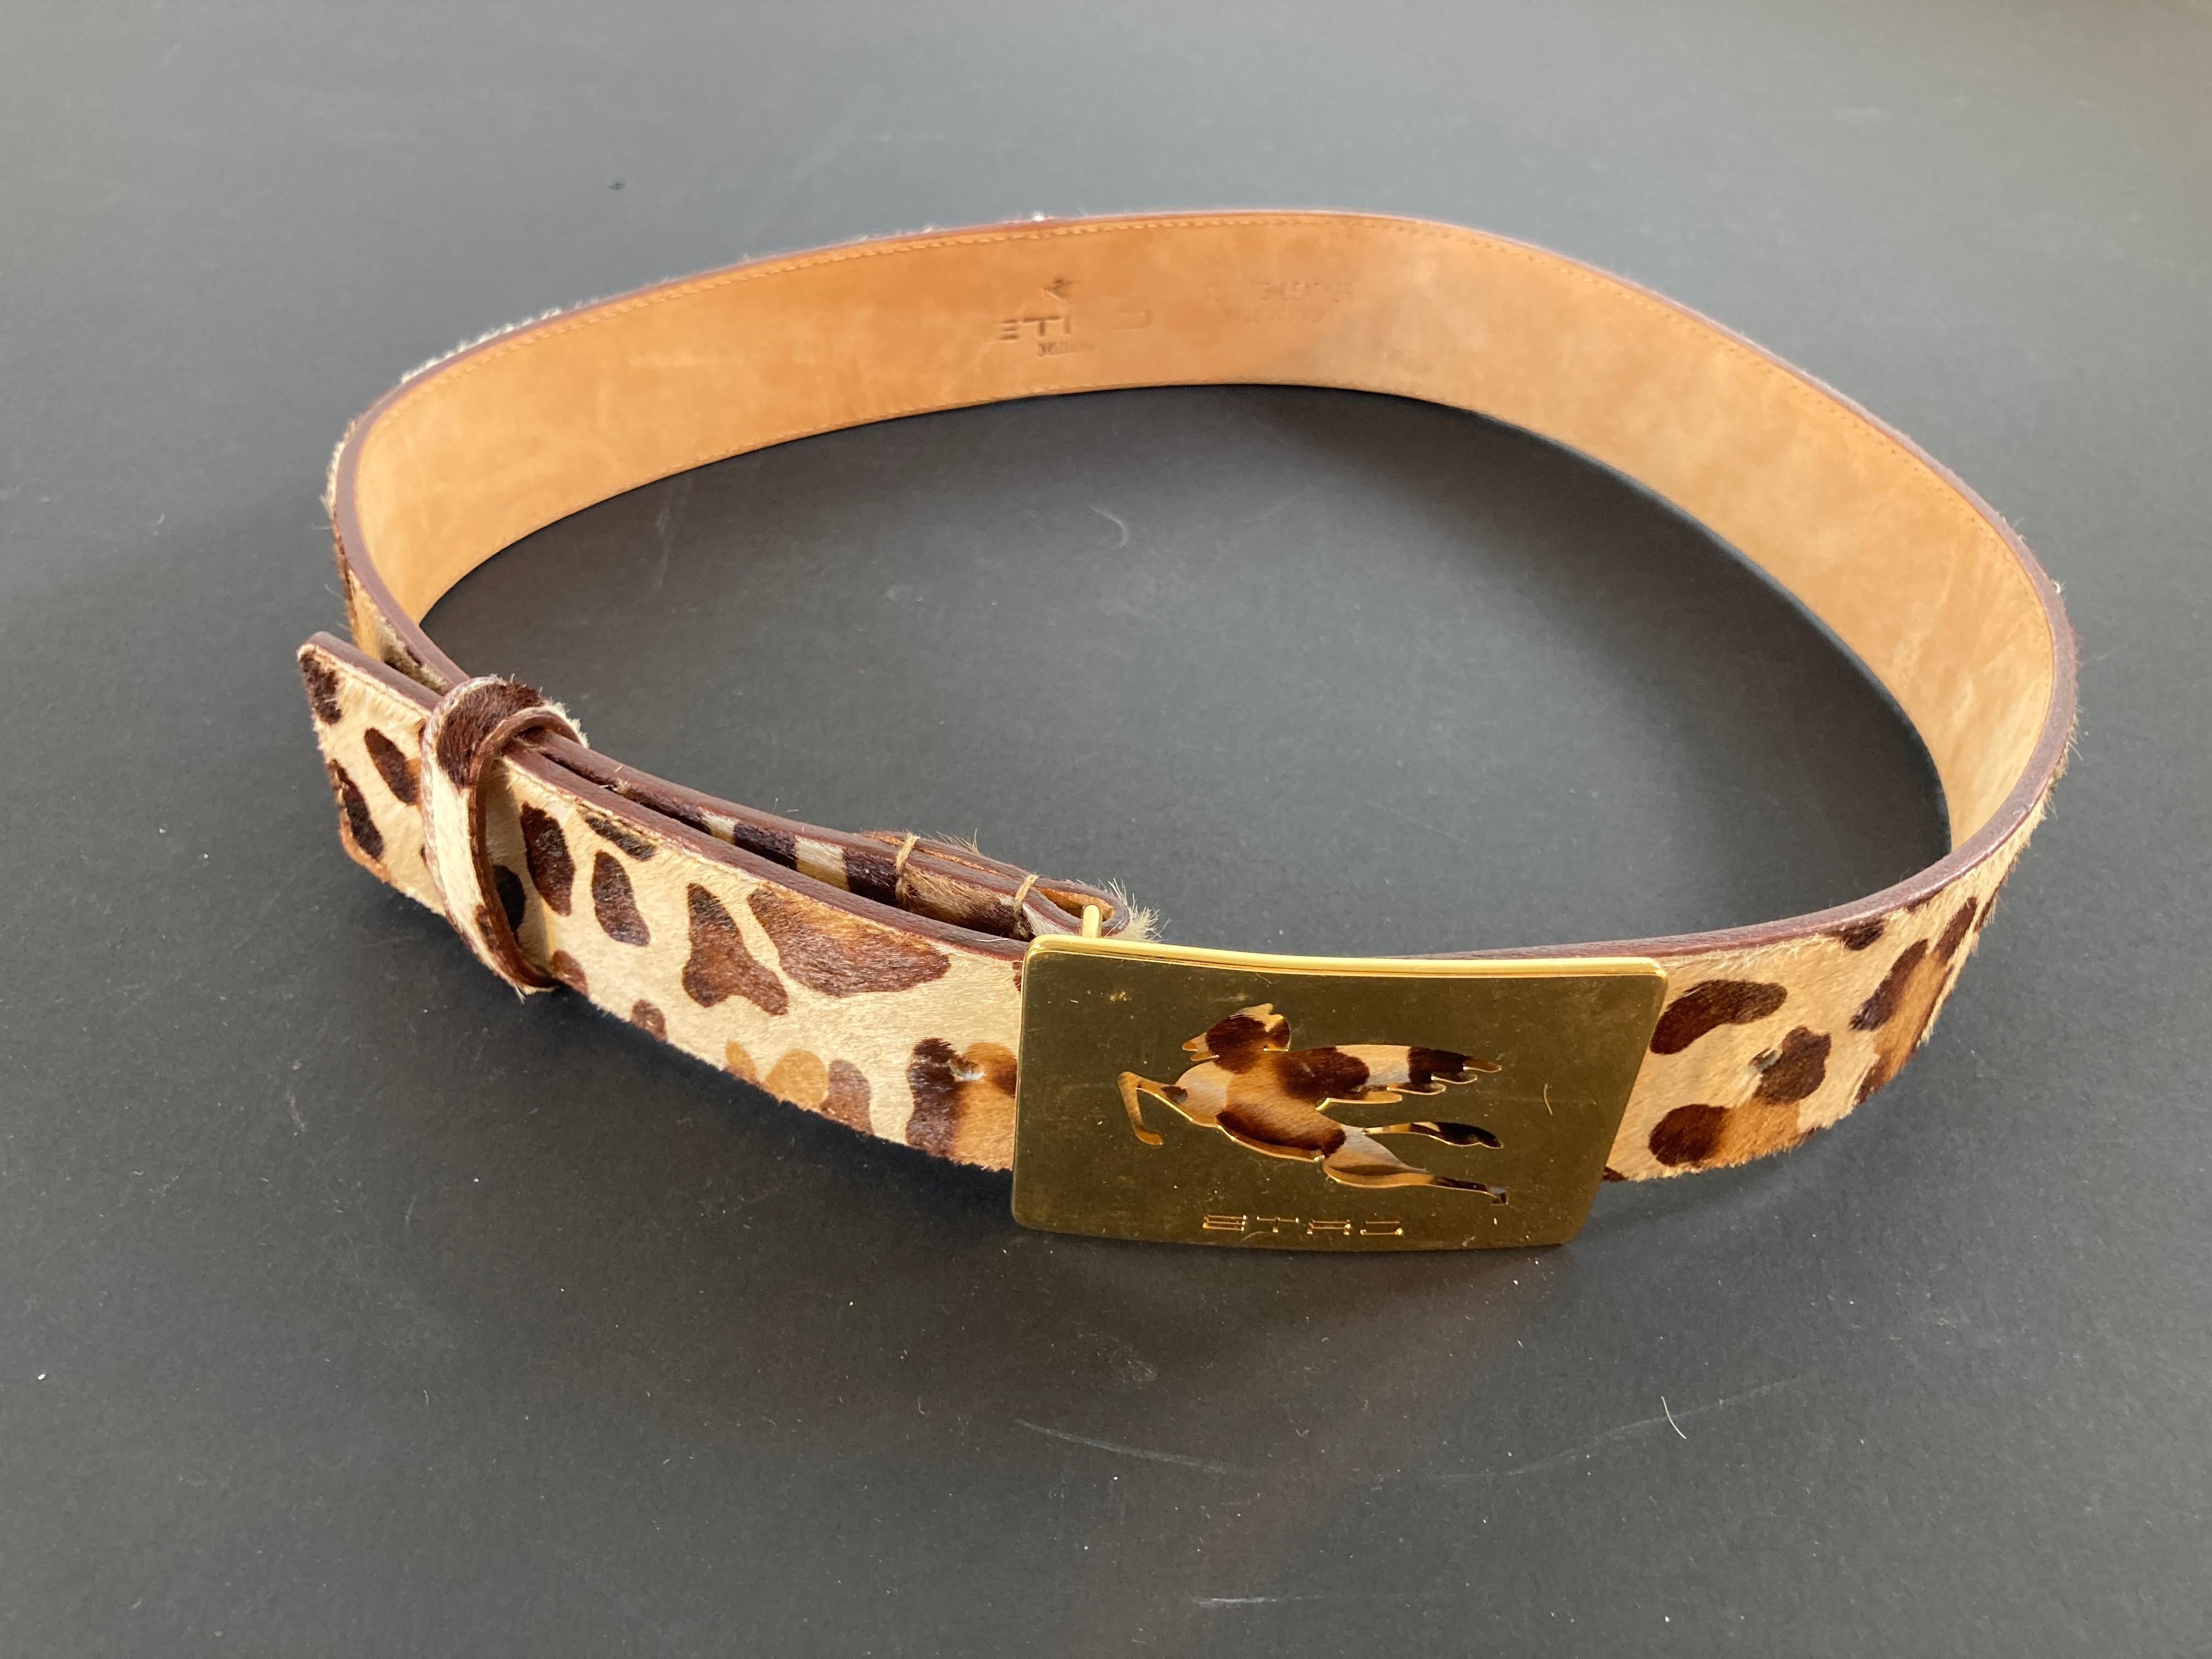 Vintage ETRO leopard-print leather belt, nude calf leather leopard print with punch-hole detailing adjustable fit and metal with Pegaso cut out brass buckle fastening.
Brass bucle cut out with the iconic Pagaso horse with wings and ETRO logo.
Etro